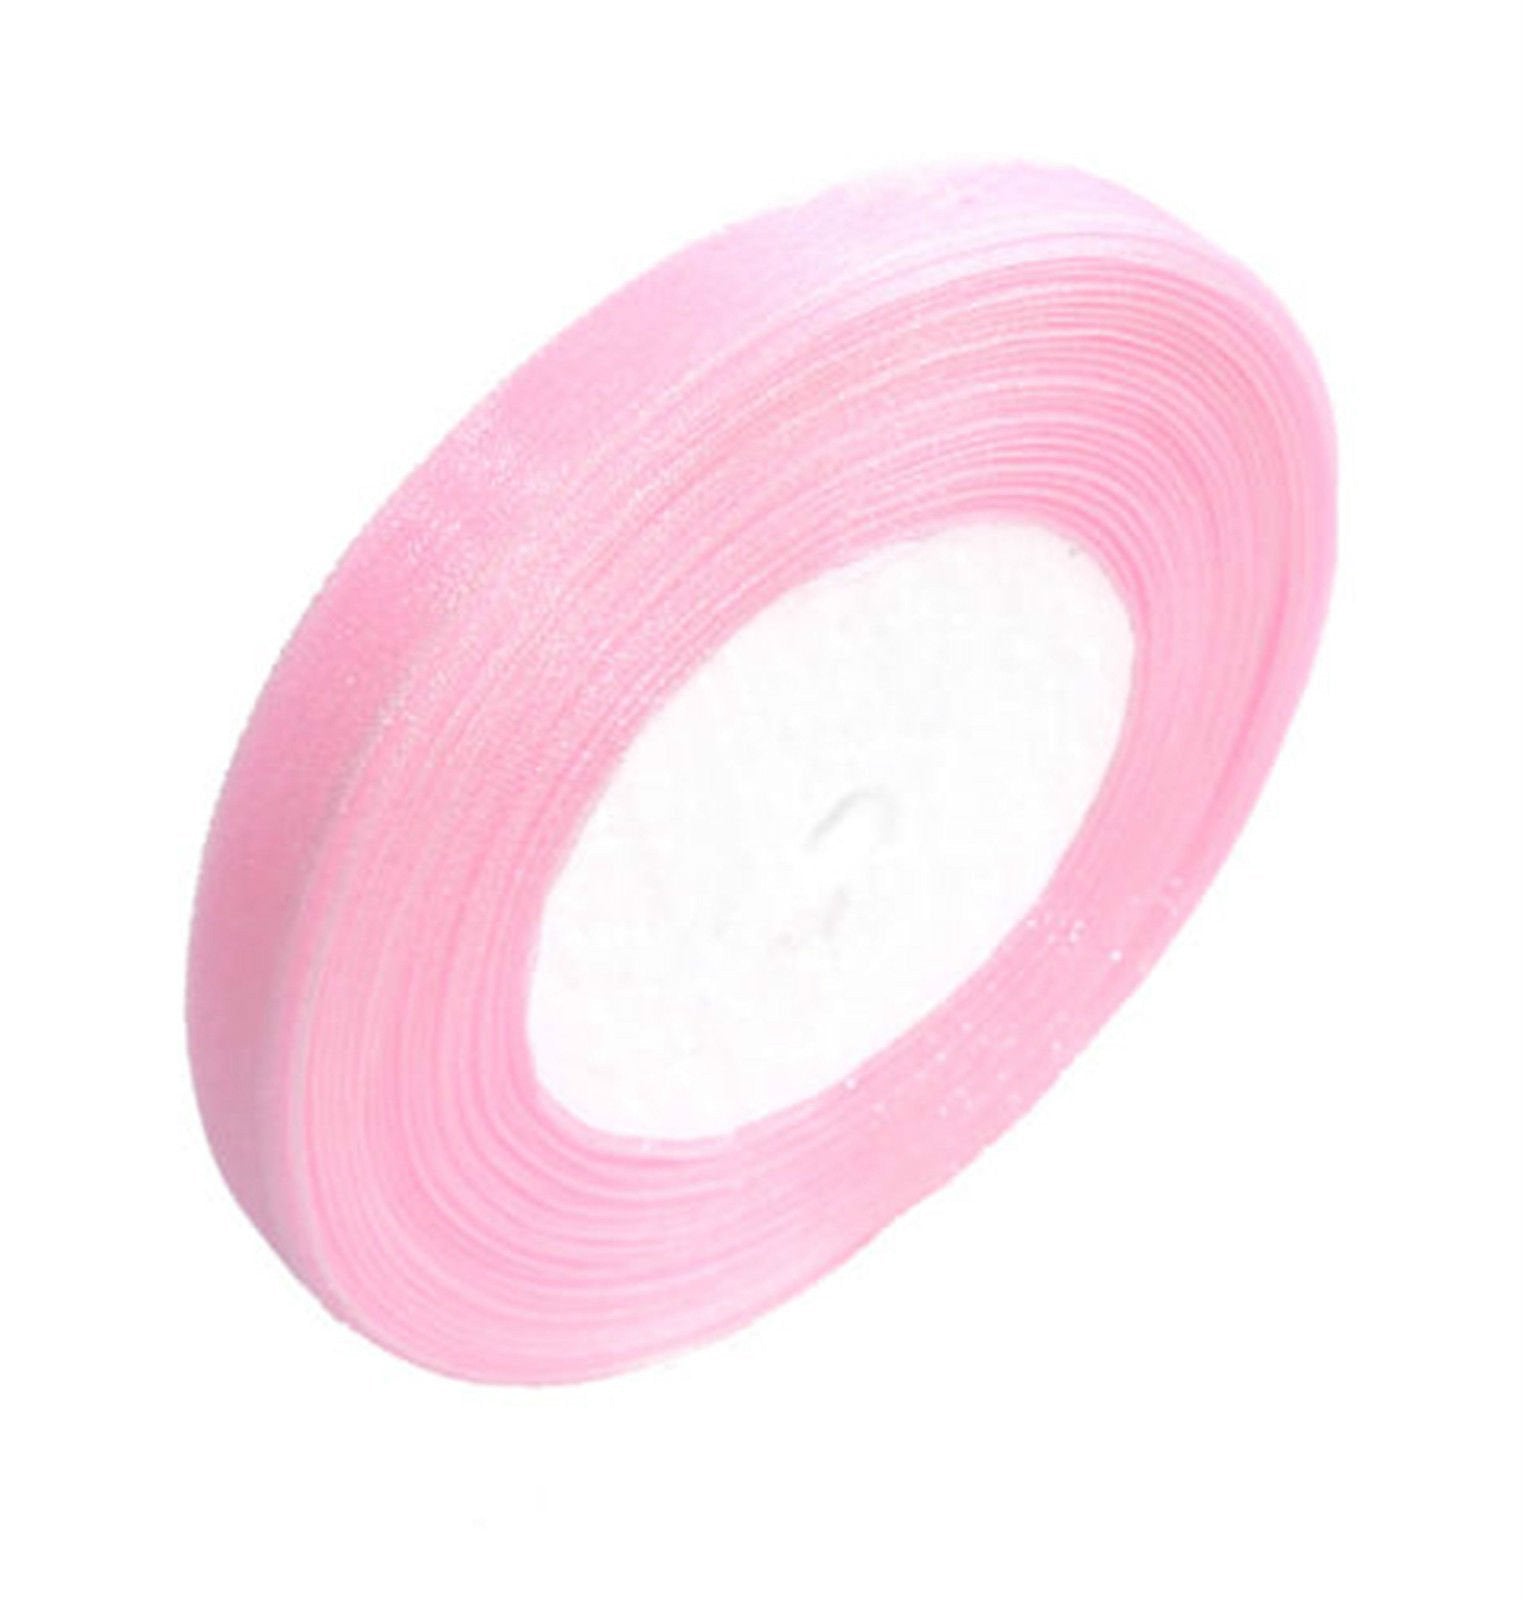 GCS Pink Organza Ribbon 12mm Scrapbooking, Gift wrapping, home deco. 46 meters / 50 Yards Rolls London - BUY 3 Rolls & Get 4th Free